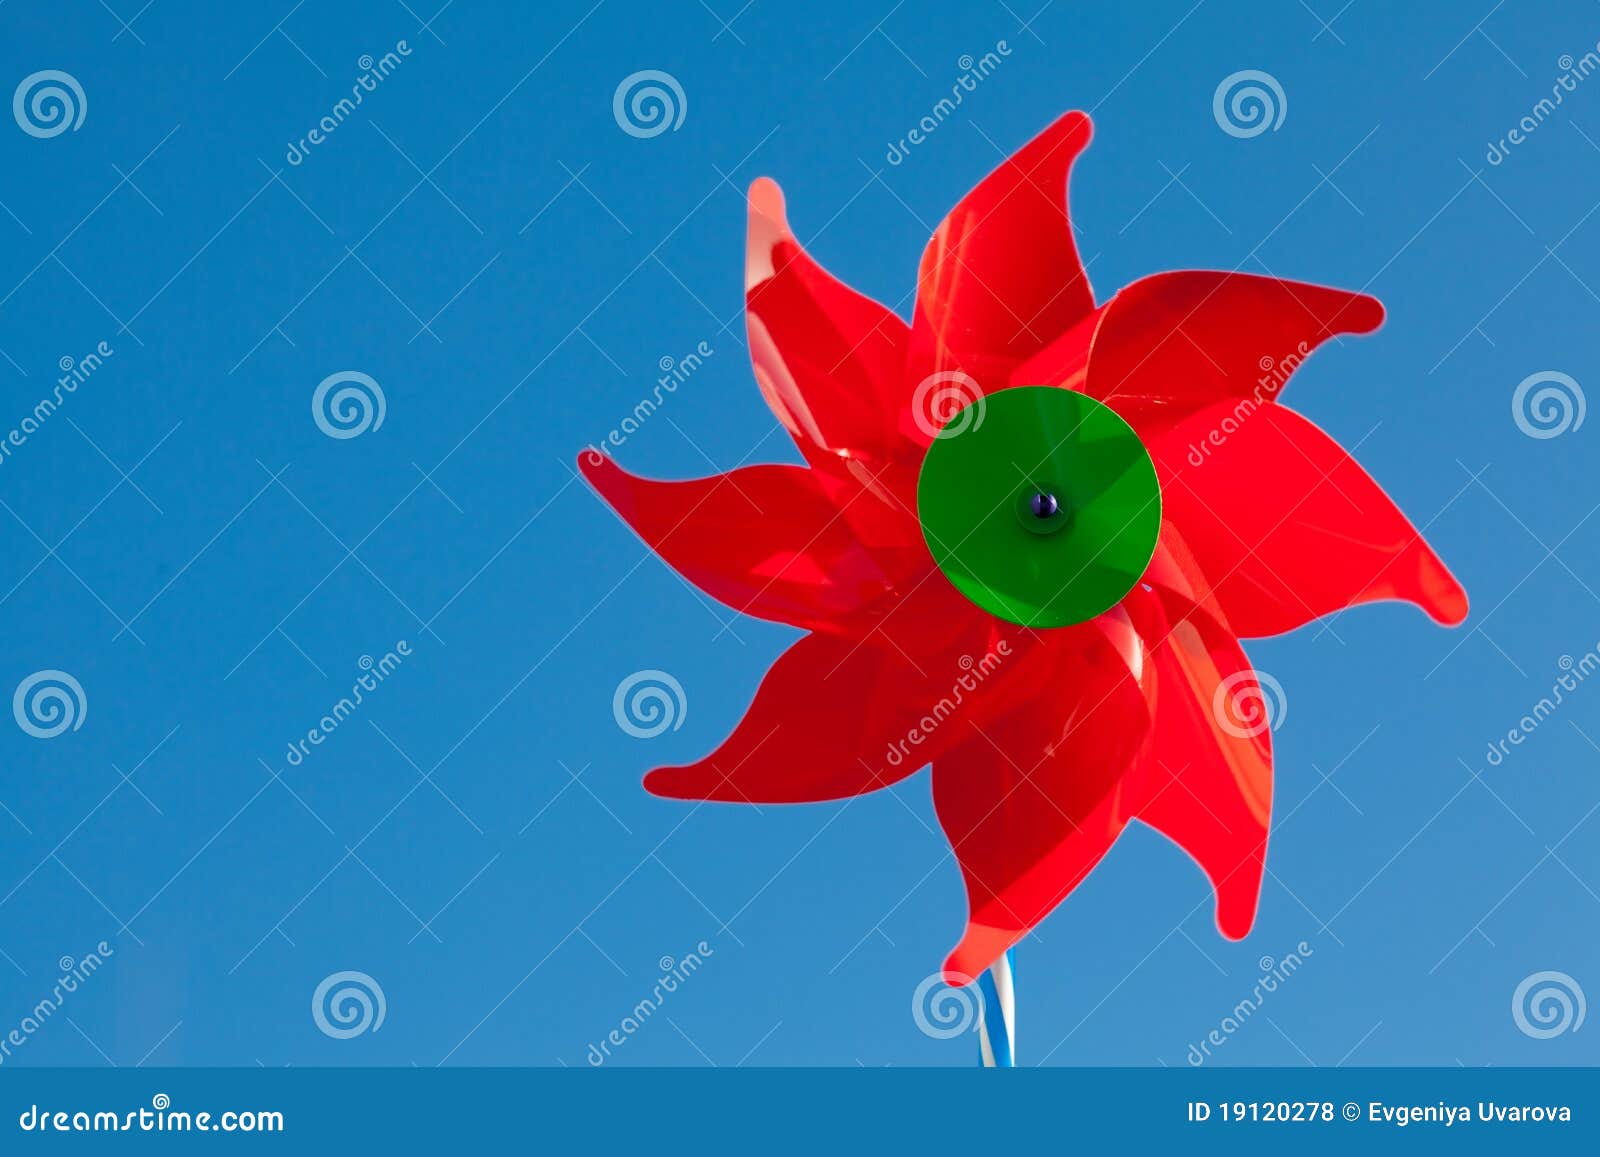 Toy Red Windmill Royalty Free Stock Photos - Image: 19120278